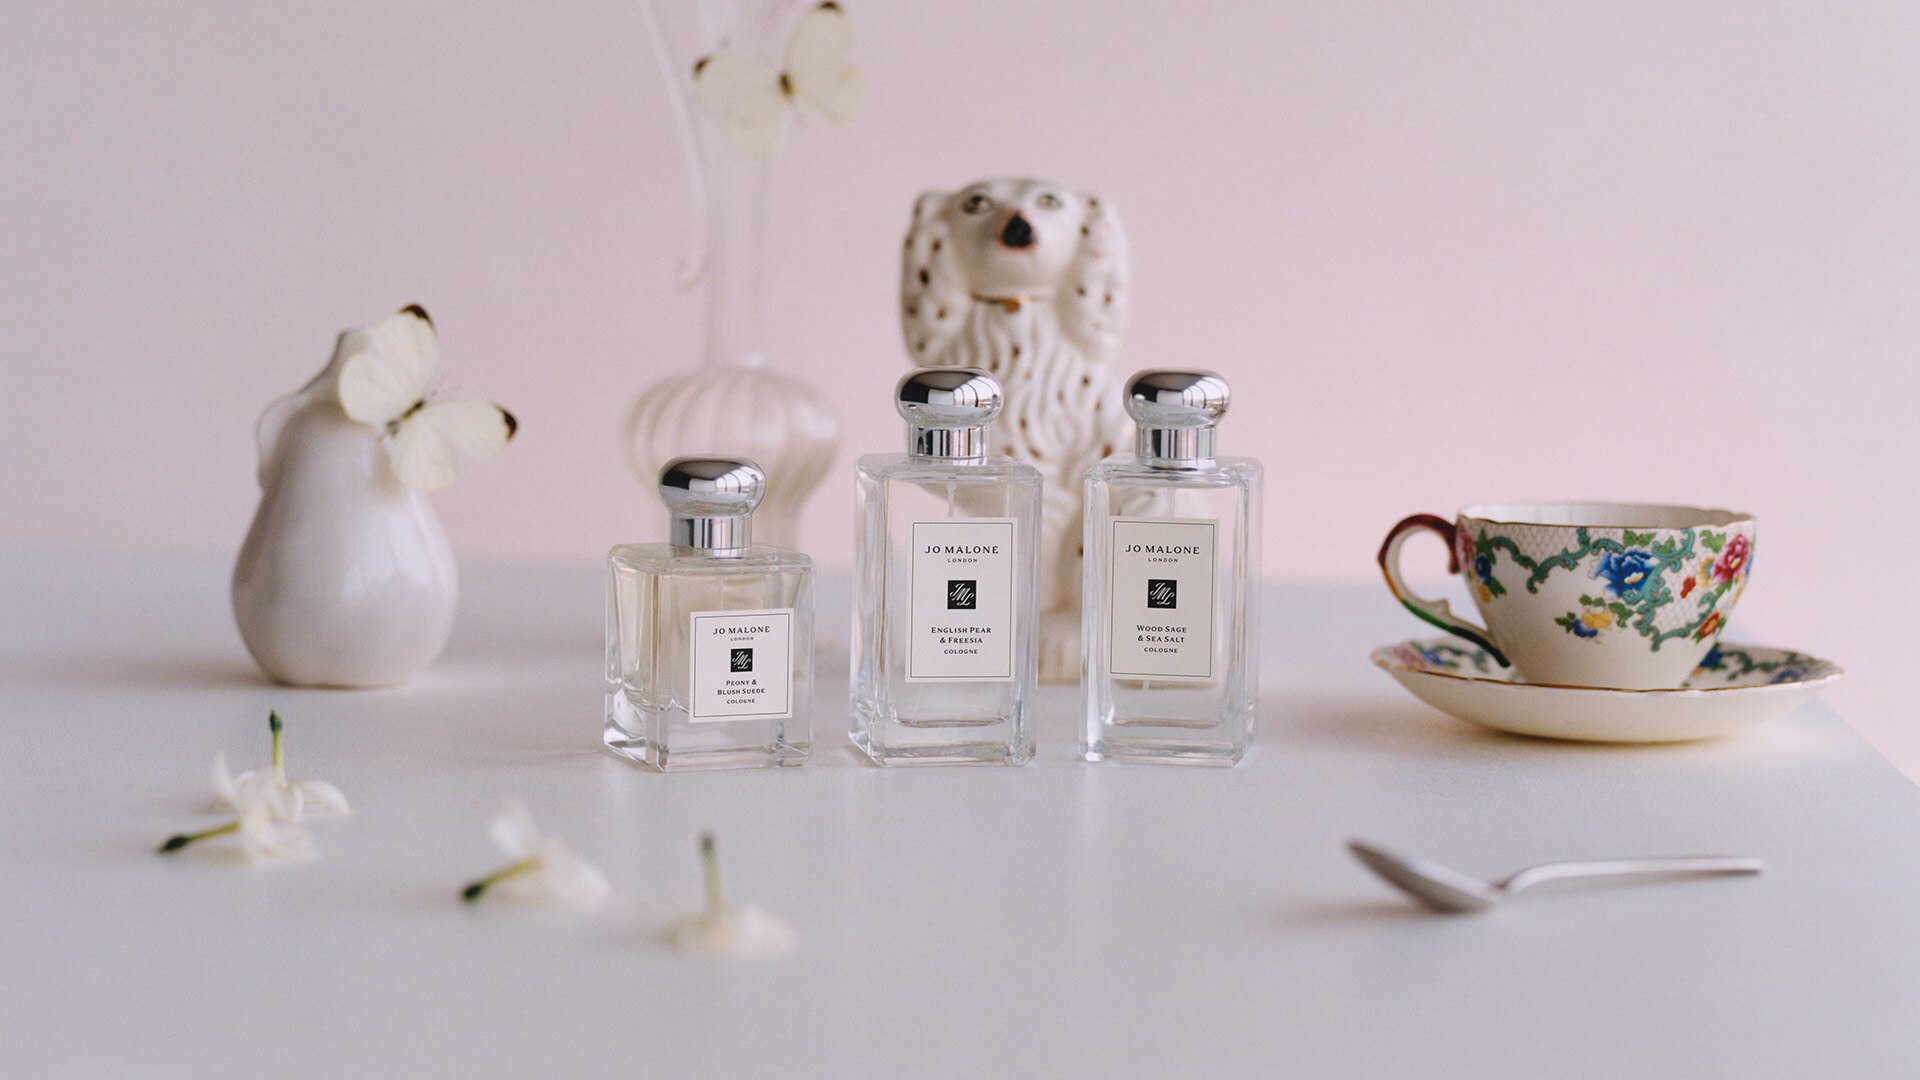 Jo Malone London Peony & Blush Suede 50ml Cologne and Wood Sage & Sea Salt and English Pear & Freesia 100ml Colognes